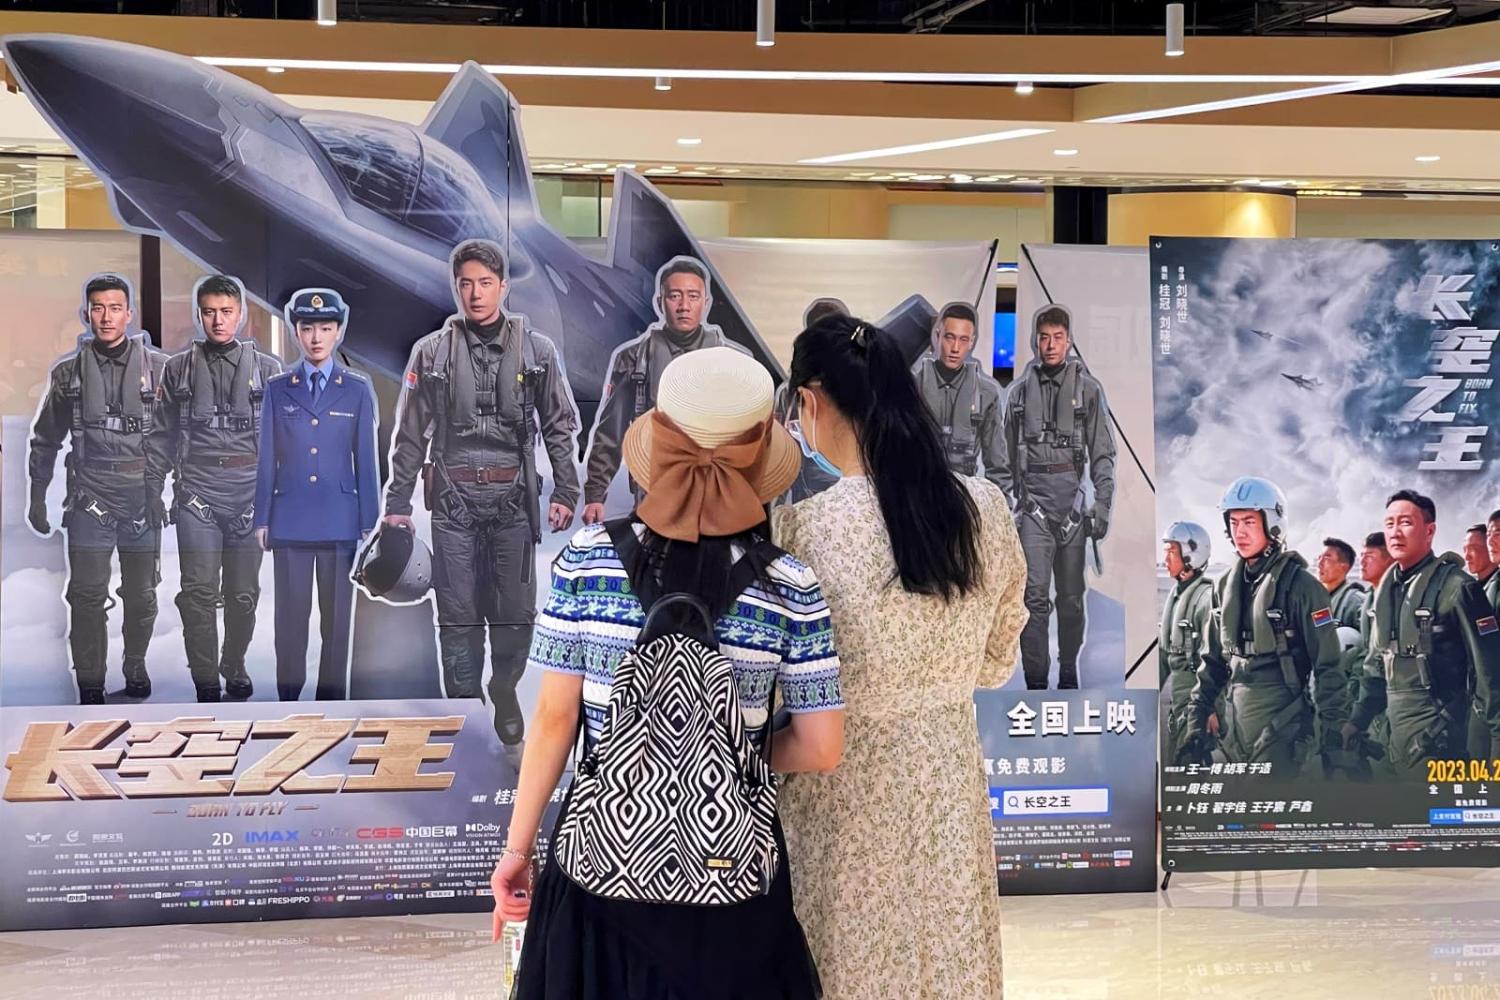 “Born to Fly” film posters at a cinema in Beijing, 1 May 2023 (VCG via Getty Images)